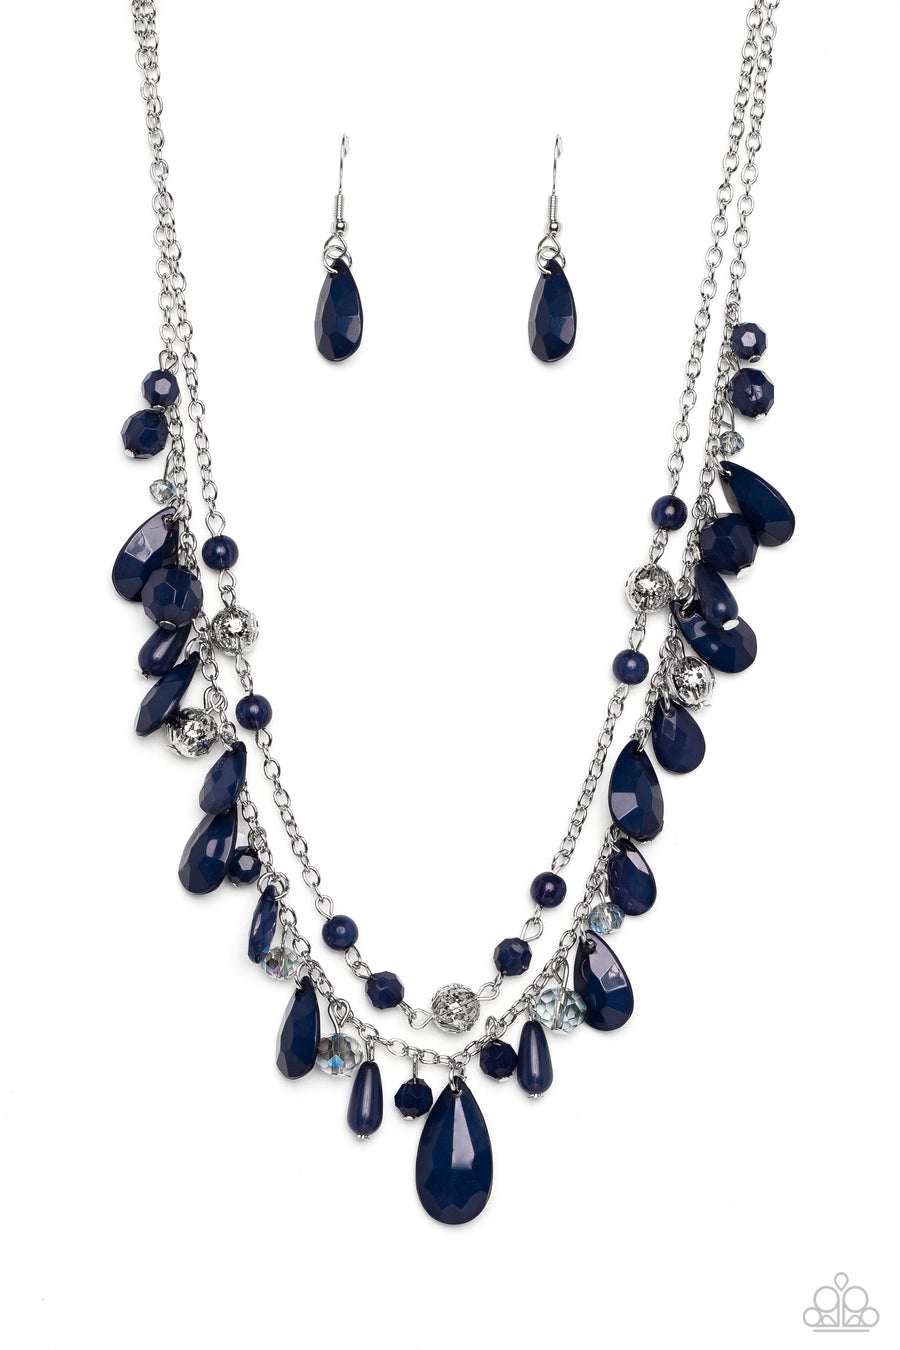 Flirty Flood - Blue and Silver Necklace - Paparazzi Accessories - A boisterous collection of blue teardrop and round beads, textured silver accents, and faceted blue crystal-like beads trickle from a double strand of silver chain, resulting in flirtatious layers down the neckline.